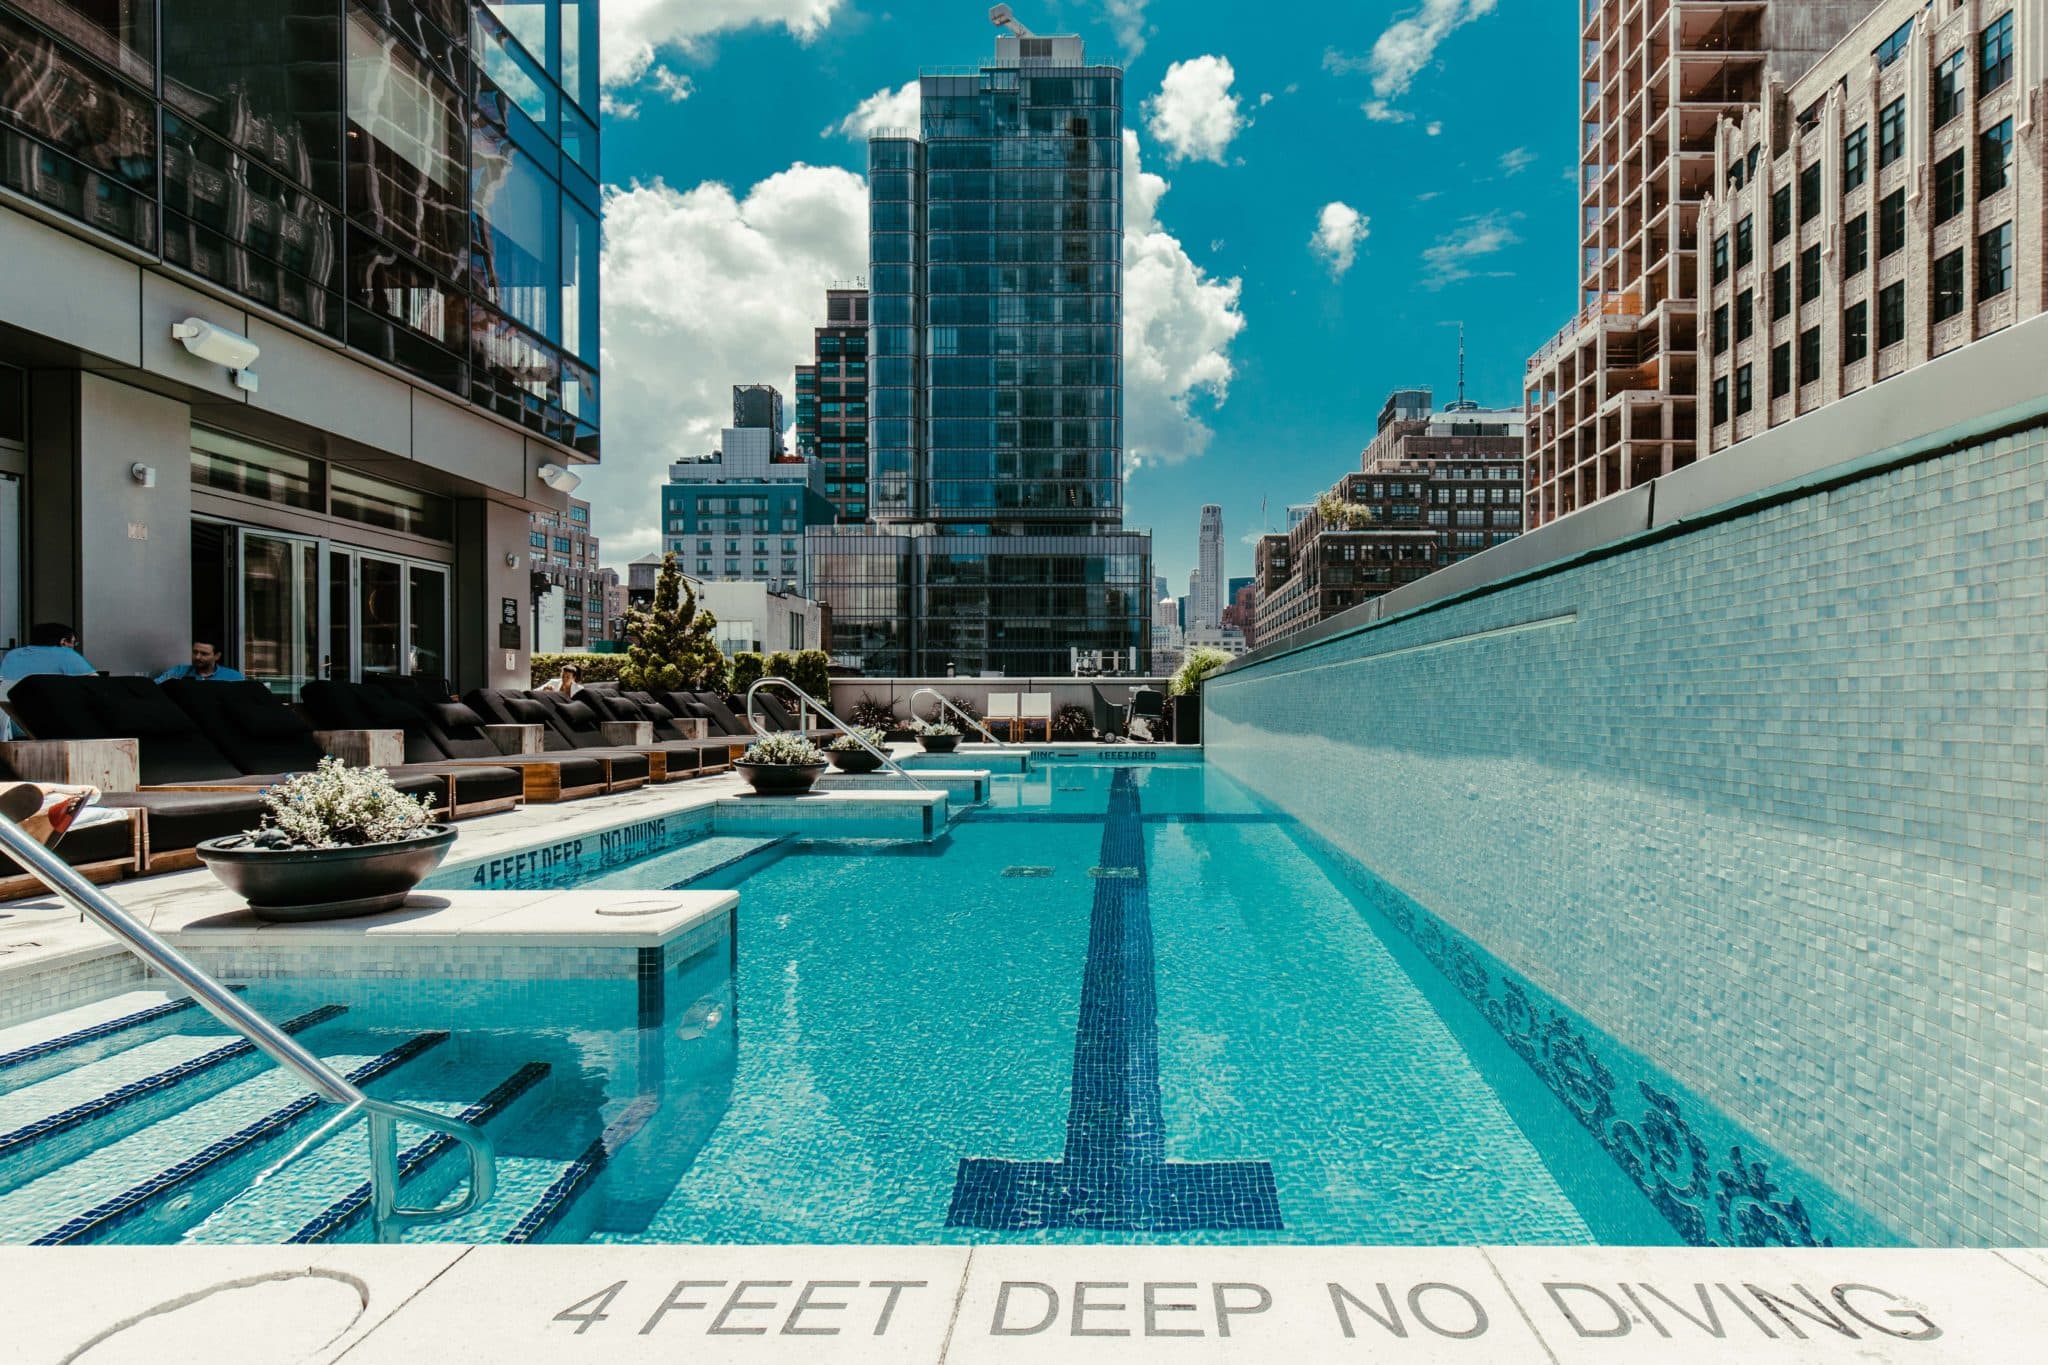 8 Fabulous Chicago Hotel Rooftop Pools For An Ultimate Daycation